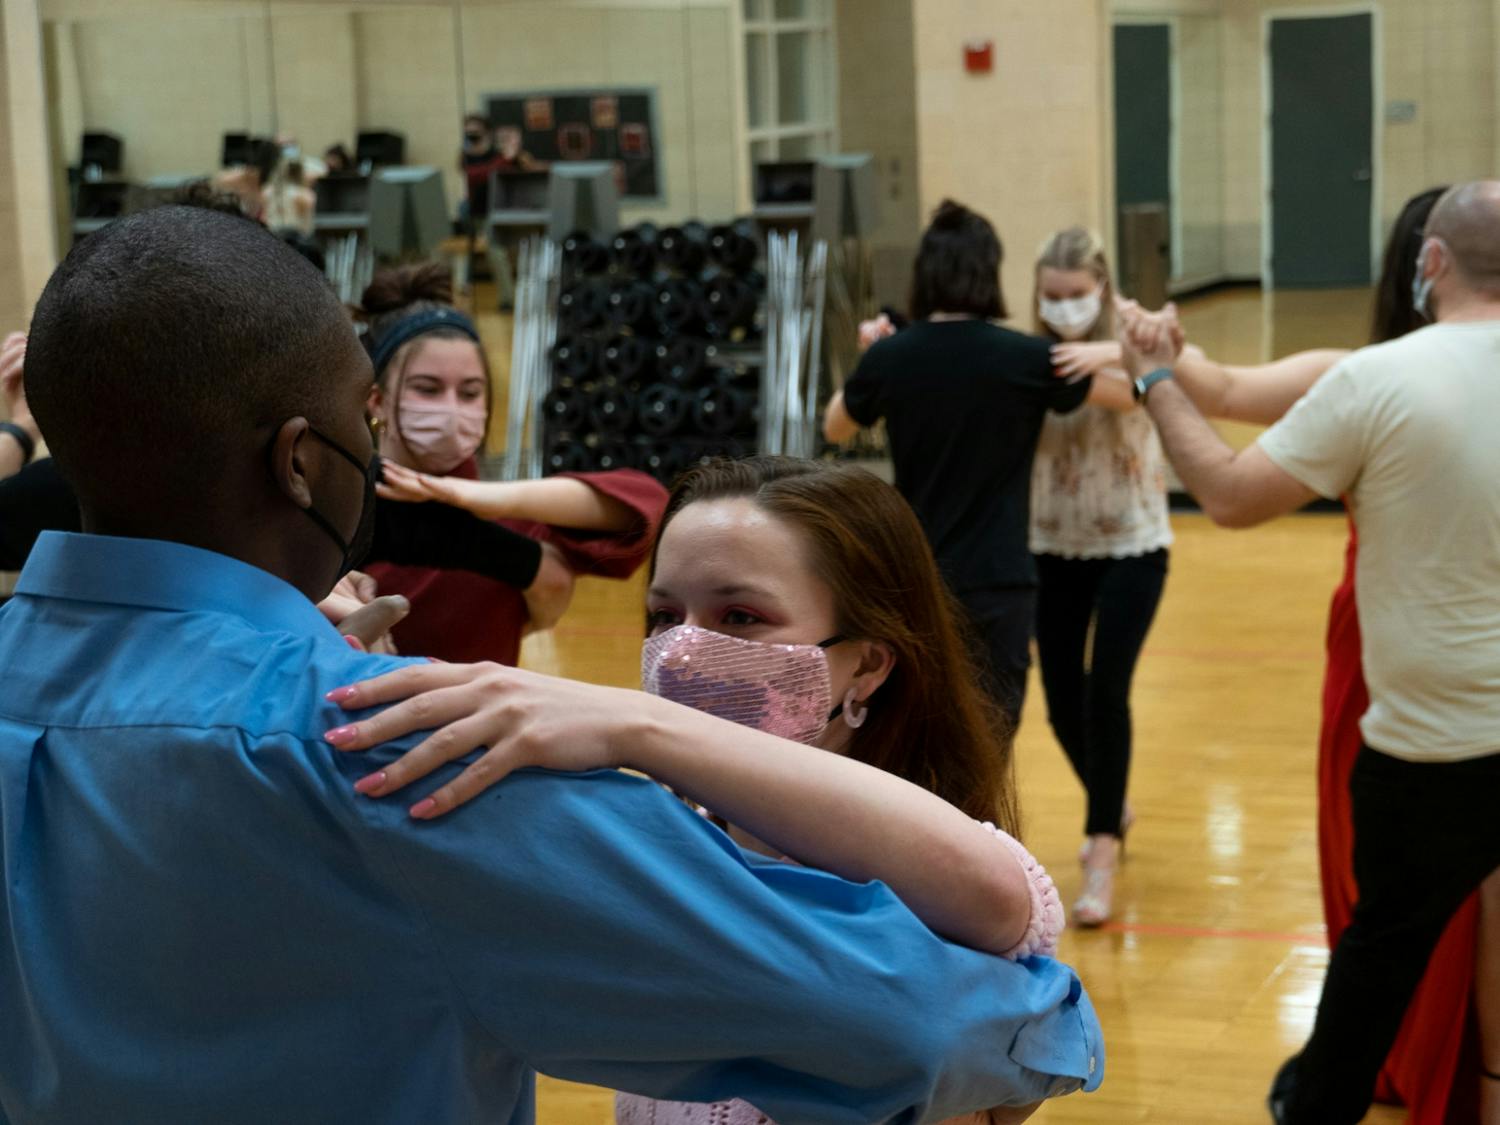 Participants of the Carolina Ballroom Dance Club learn the waltz during its practice on Feb. 15, 2022. Members of the club come together to learn a variety of classical dances including the tango, samba and Cha cha, holding the motto of “if you can walk, you can dance.” 